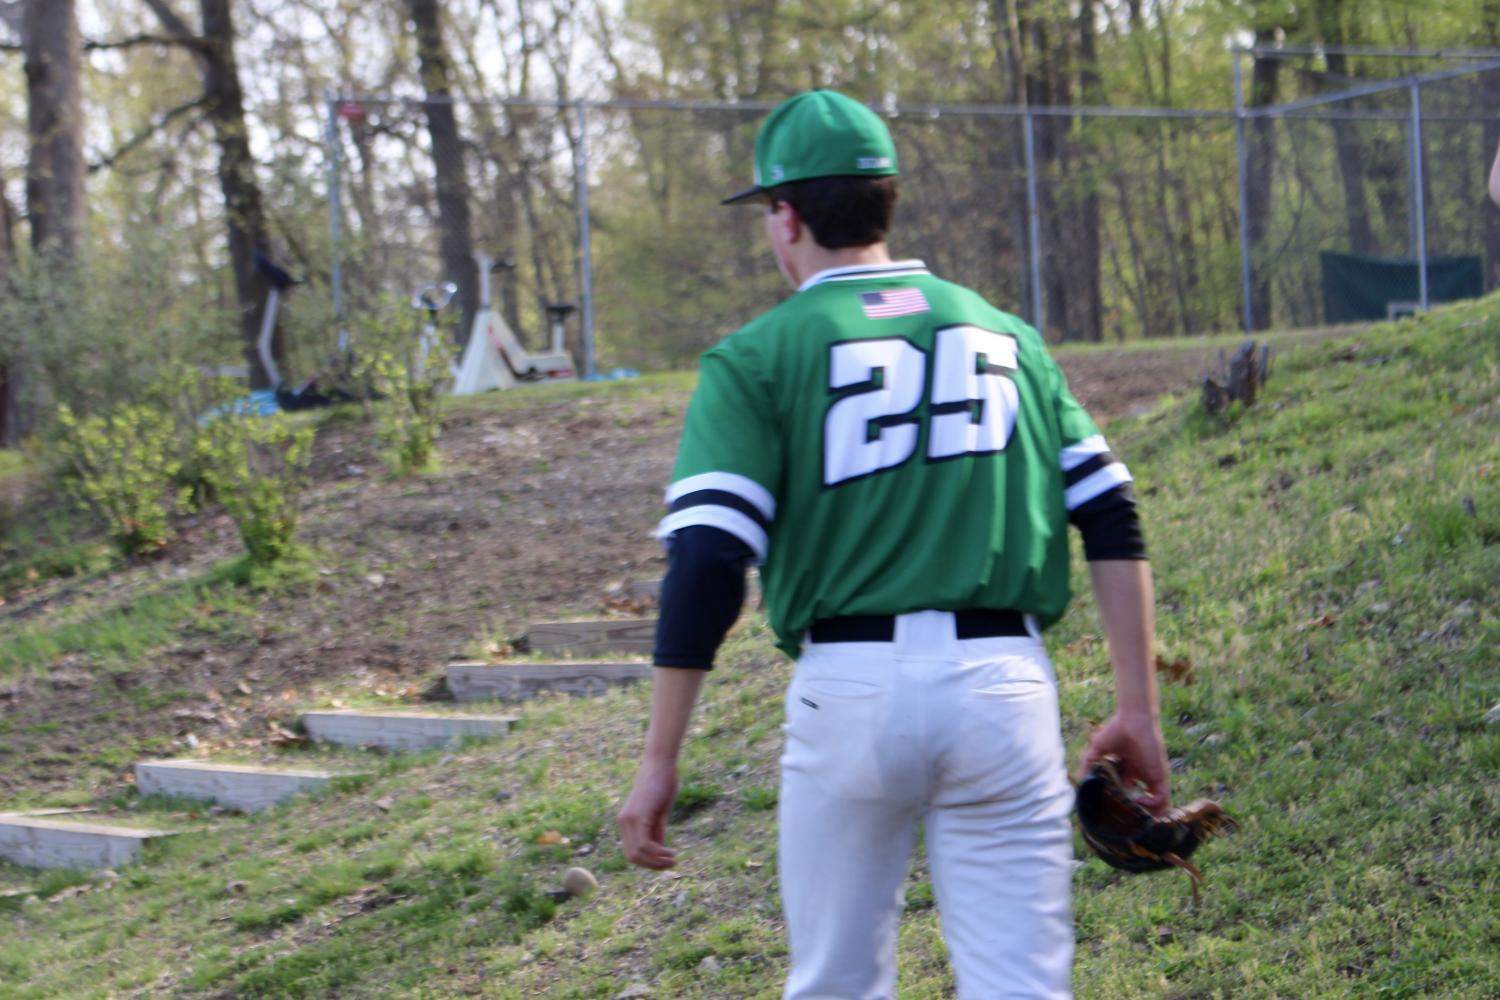 Pascack+Valley+starting+pitcher+Riley+Weis+before+a+game.+Weis+threw+6+innings+and+got+the+no-decision+in+PVs+3-2+extra+inning+loss+to+Cranford+in+the+Group+3+semifinals.